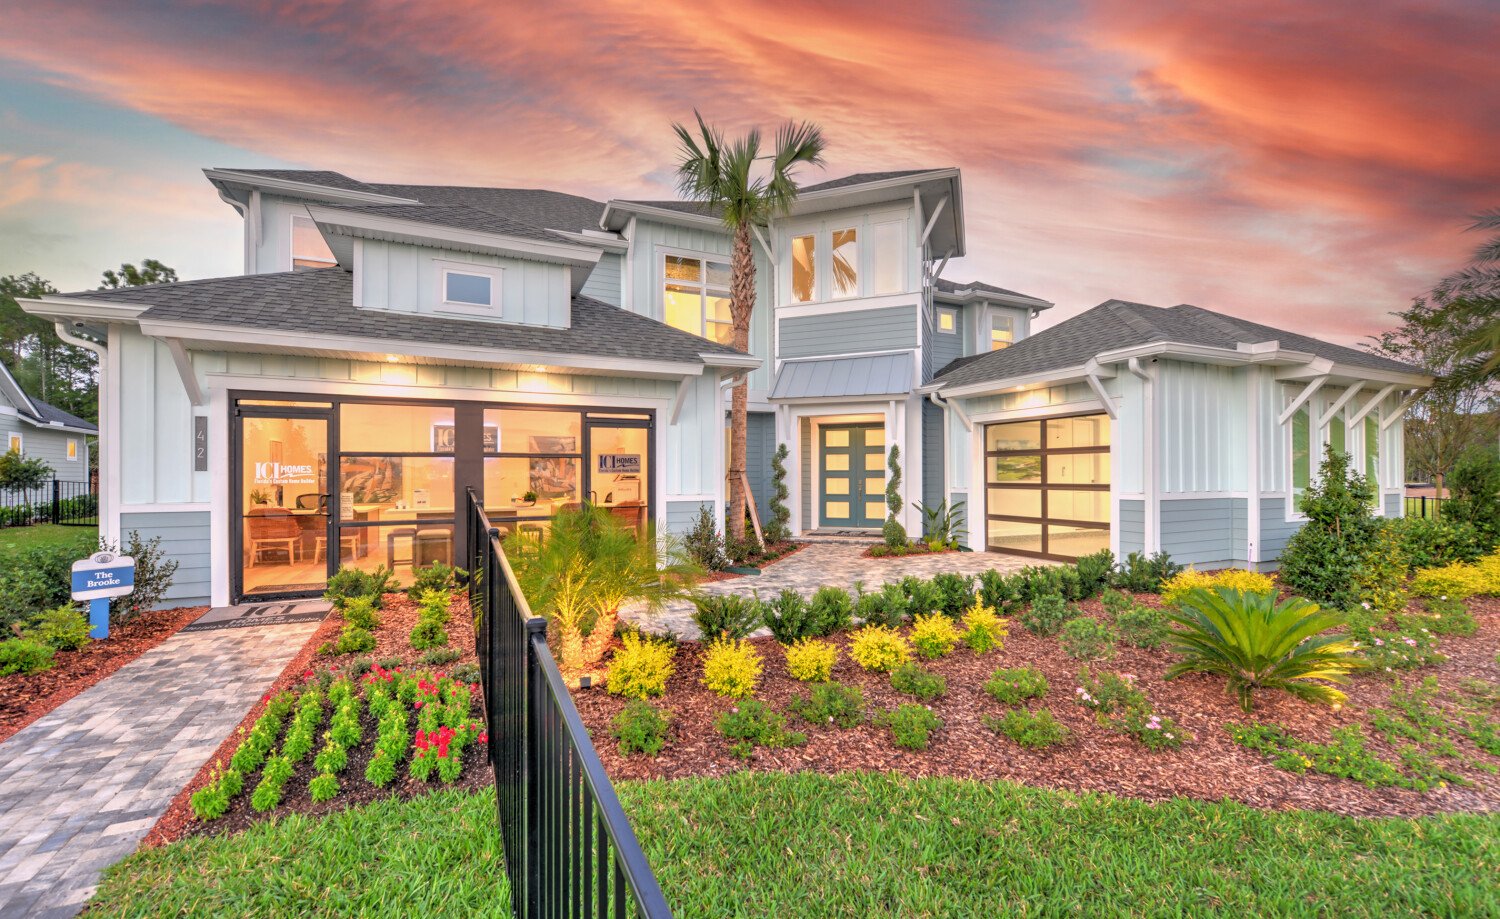 ICI Homes' New Model at Coral Ridge in Nocatee is Finally Complete! - brooke front exterior 7223 large